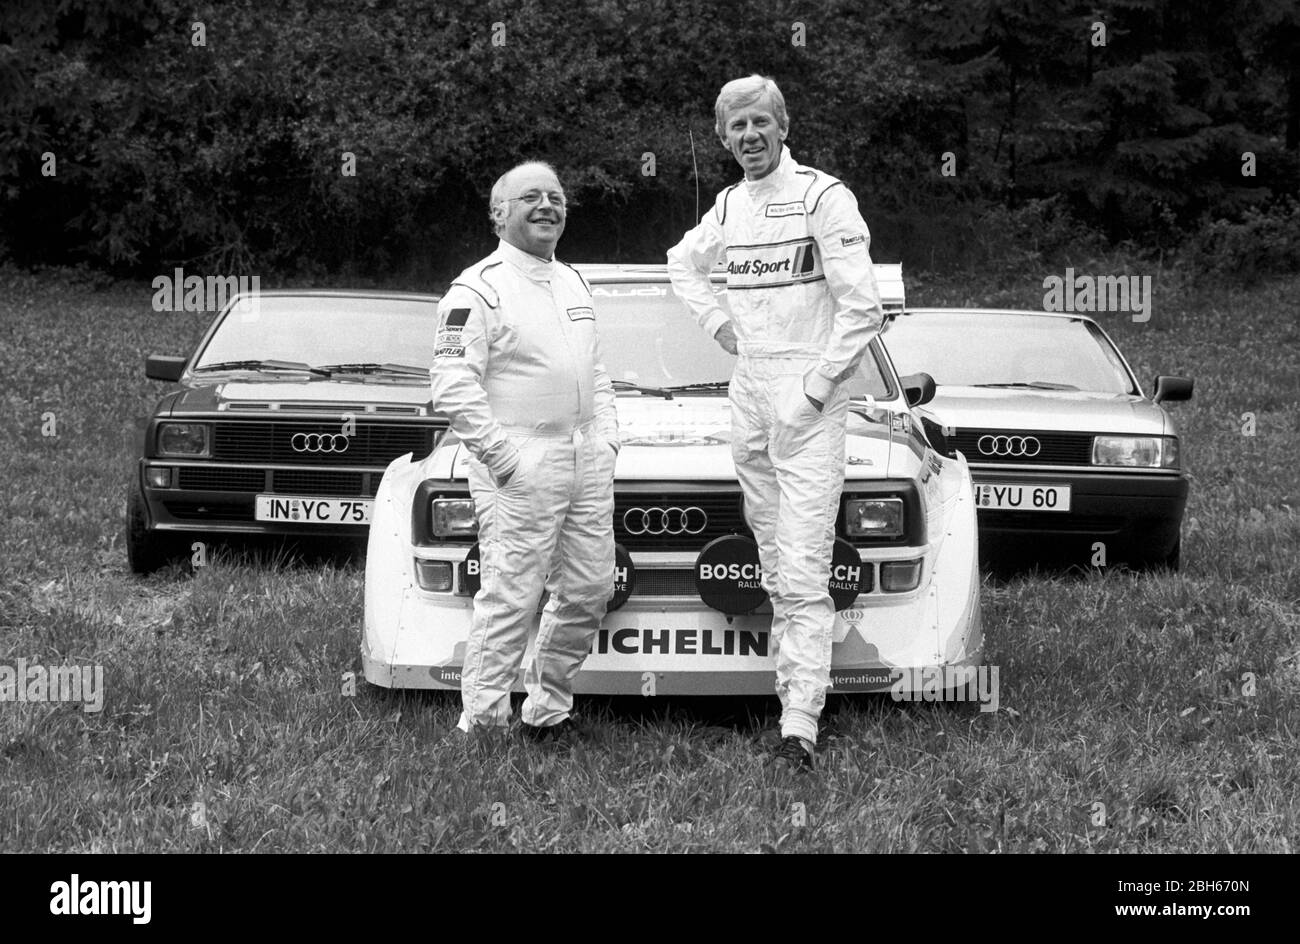 Former Labor Minister Norbert Bluem died at the age of 84. Archive photo: Norbert BLUEM, left, Blum, CDU, politician, Federal Minister of Labor, in a racing suit, and Audi factory driver Walter ROEHRL Rohrl, test driver, rally, both stand in front of an Audi Quattro, when visiting automaker Audi, test driver, test drive, half FIGURE, half-length figure, B/W photo, undated photo, approx. 1983, | usage worldwide Stock Photo